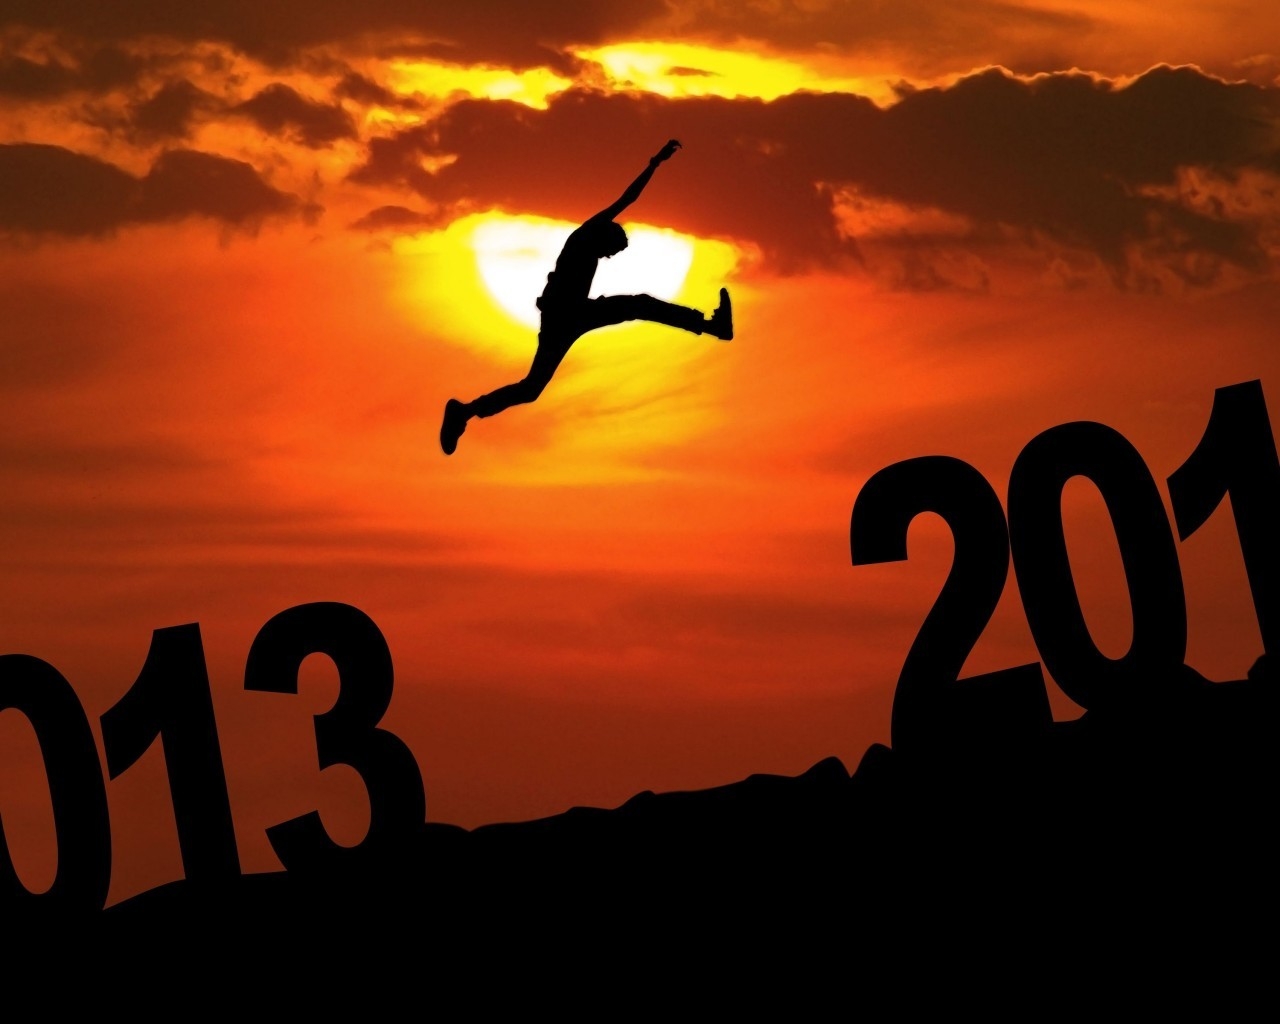 Jumping in 2014 for 1280 x 1024 resolution